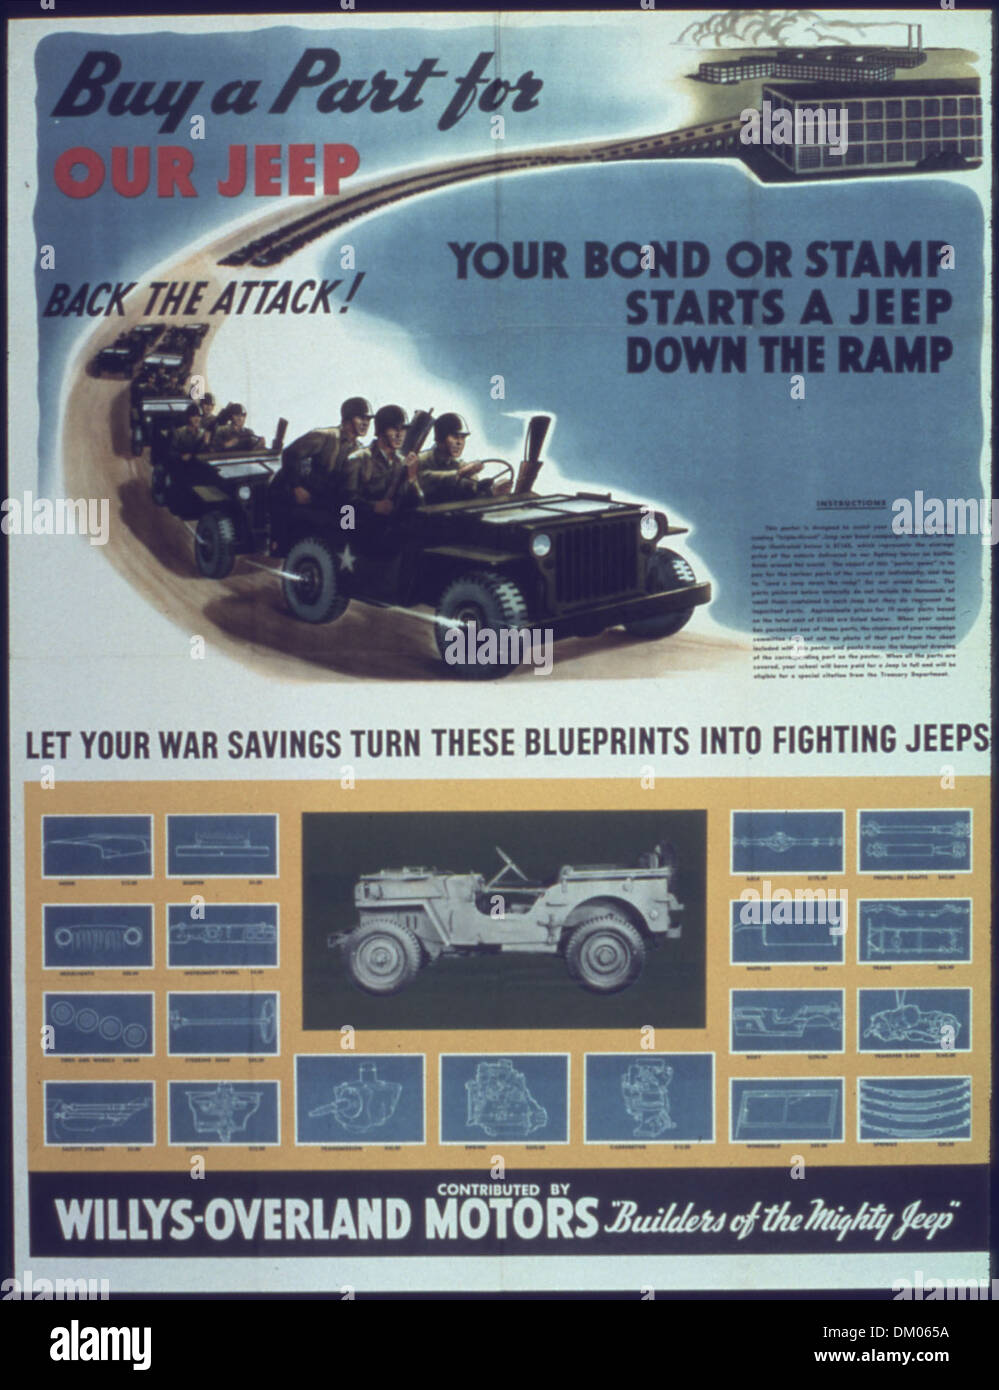 'Buy a part for your jeep. Back the attack' Your bond or stamp starts a jeep down the ramp. 513992 Stock Photo